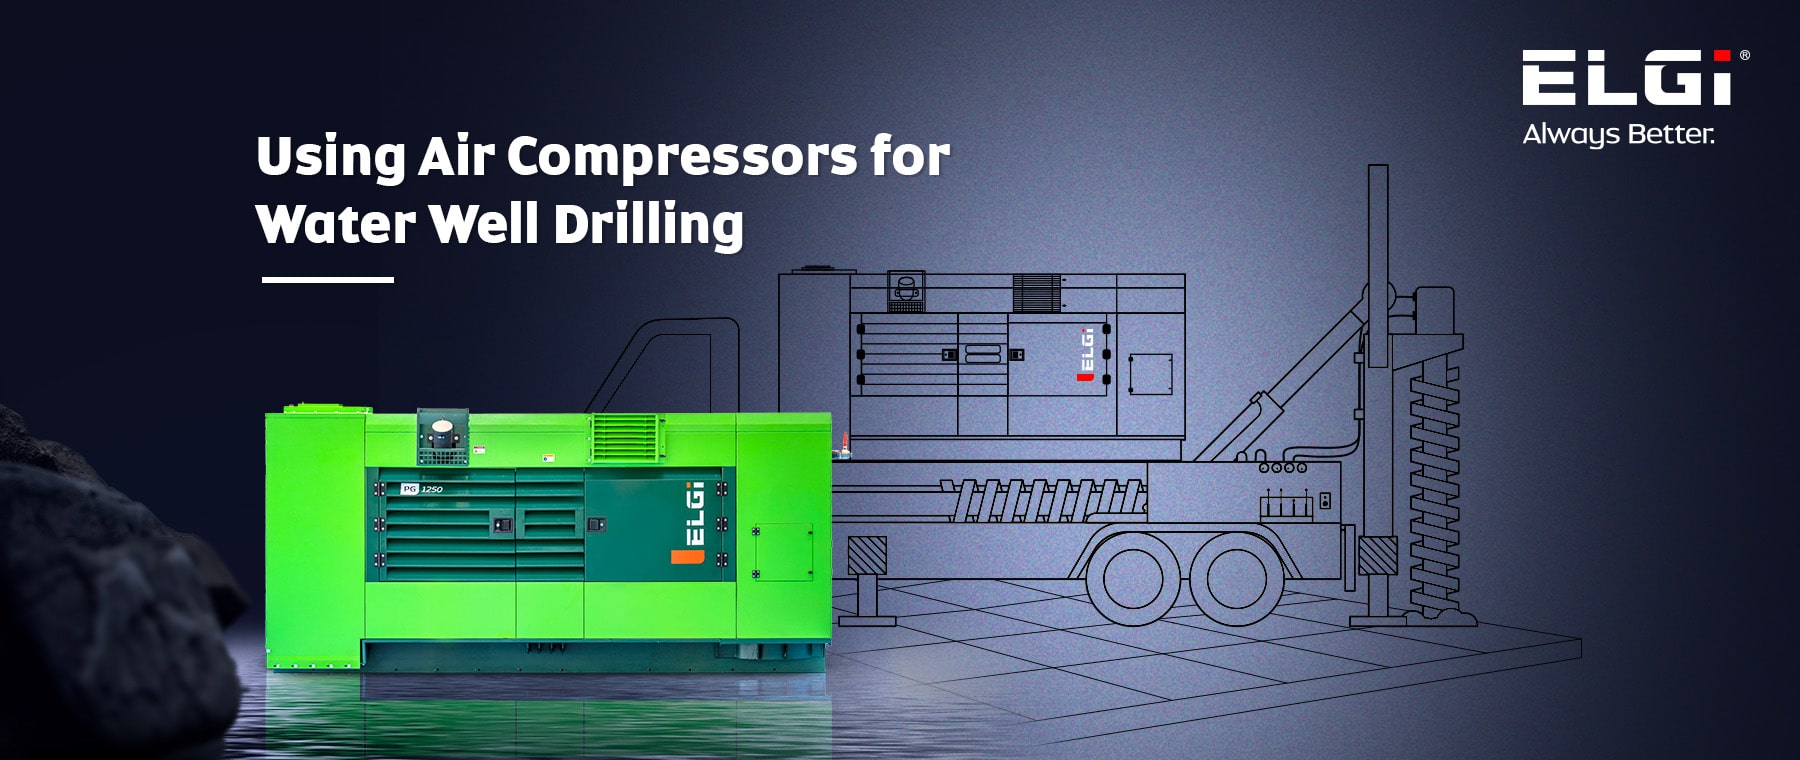 Using Air Compressors for Water Well Drilling